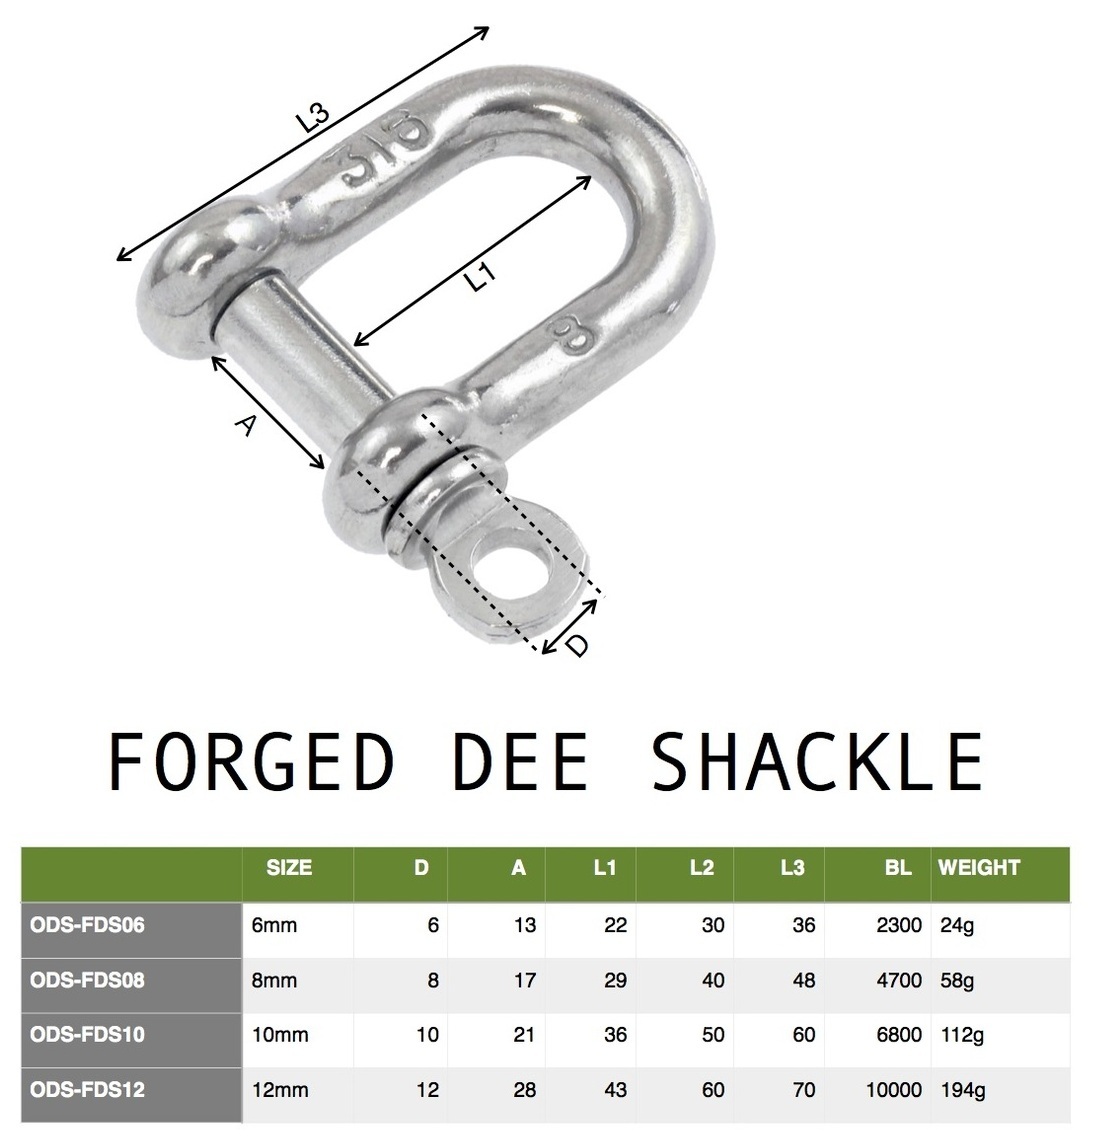 Forged_Dee_Shackle_The_Shade_Sail_Shop